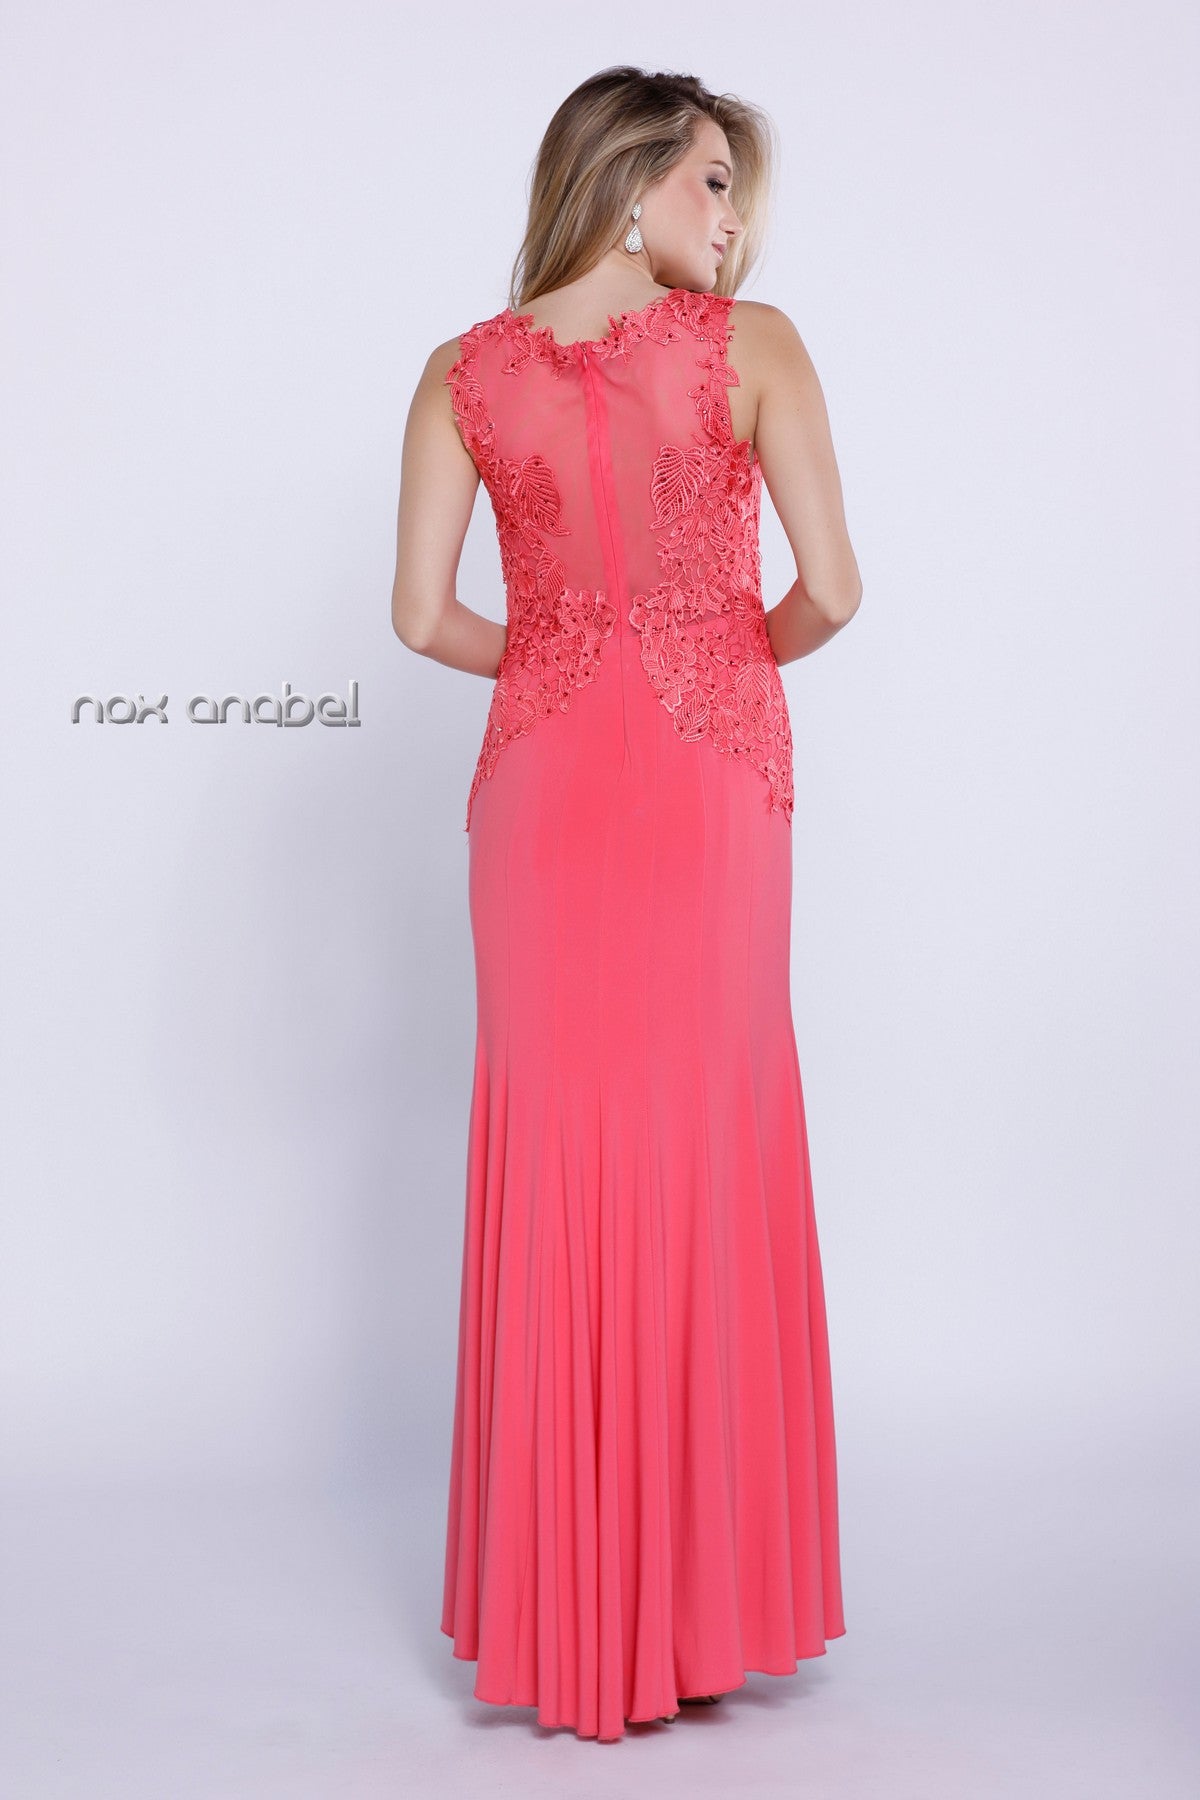 Coral Jersey V-Neck Fit and Flare Formal Gown with Lace Accent